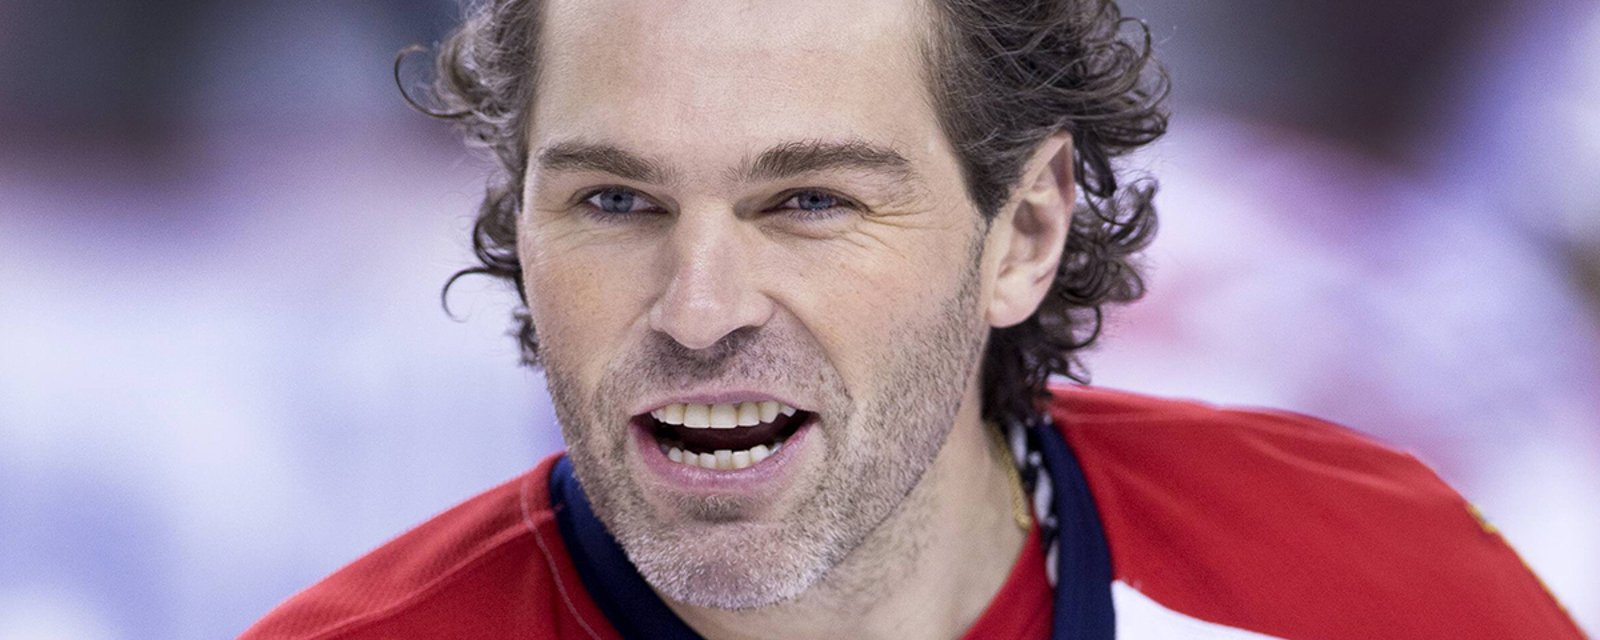 Breaking: Jagr signs a one-year deal for $1 million